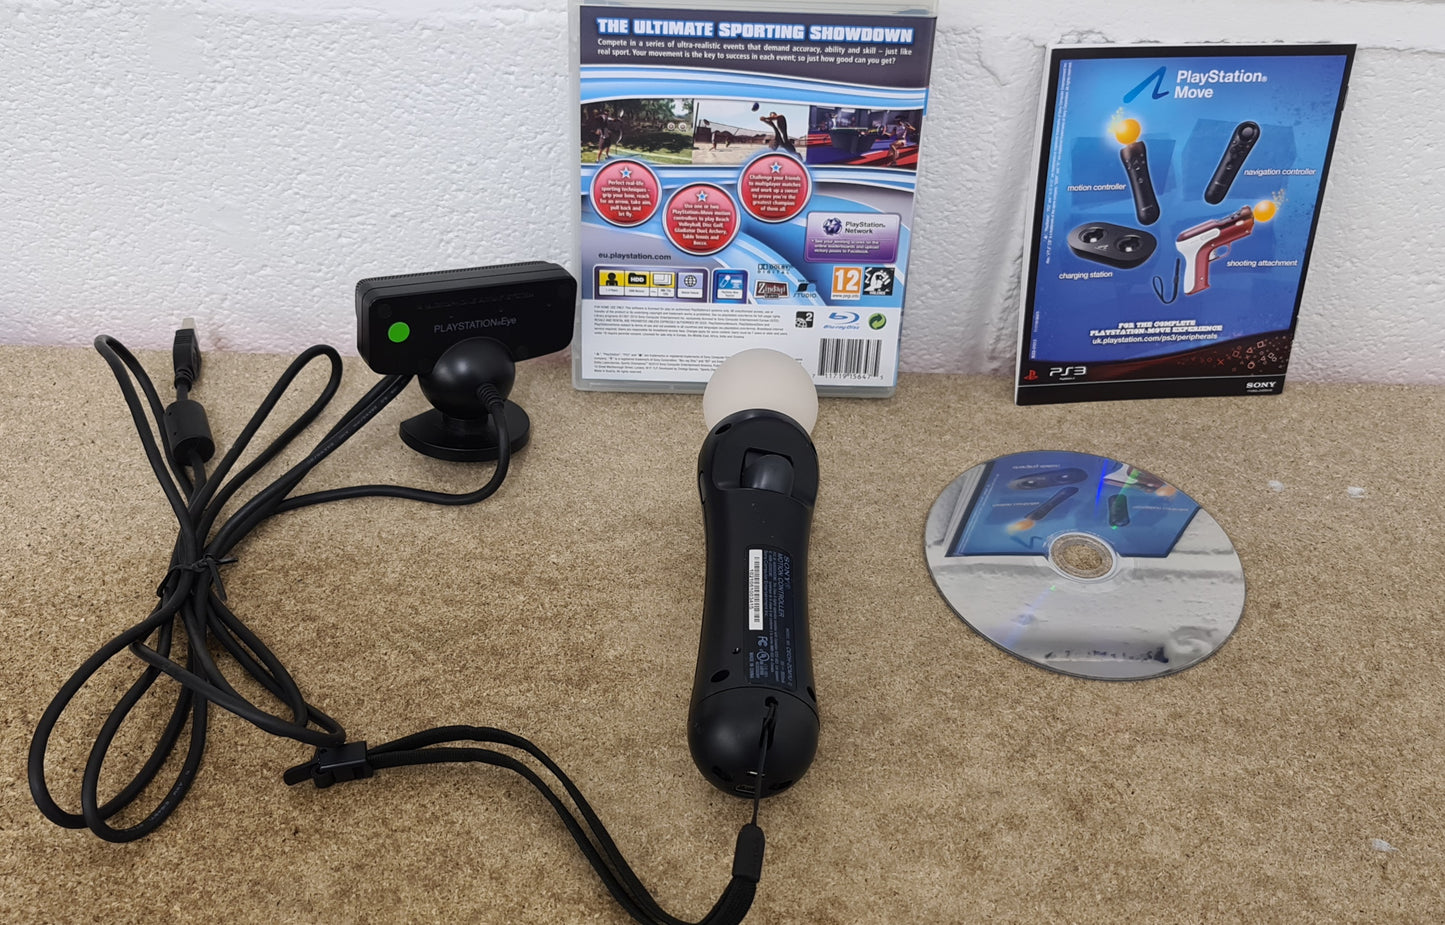 Playstation Move Motion Controller, Camera & Sports Champions Sony Playstation 3 (PS3) Accessory & Game